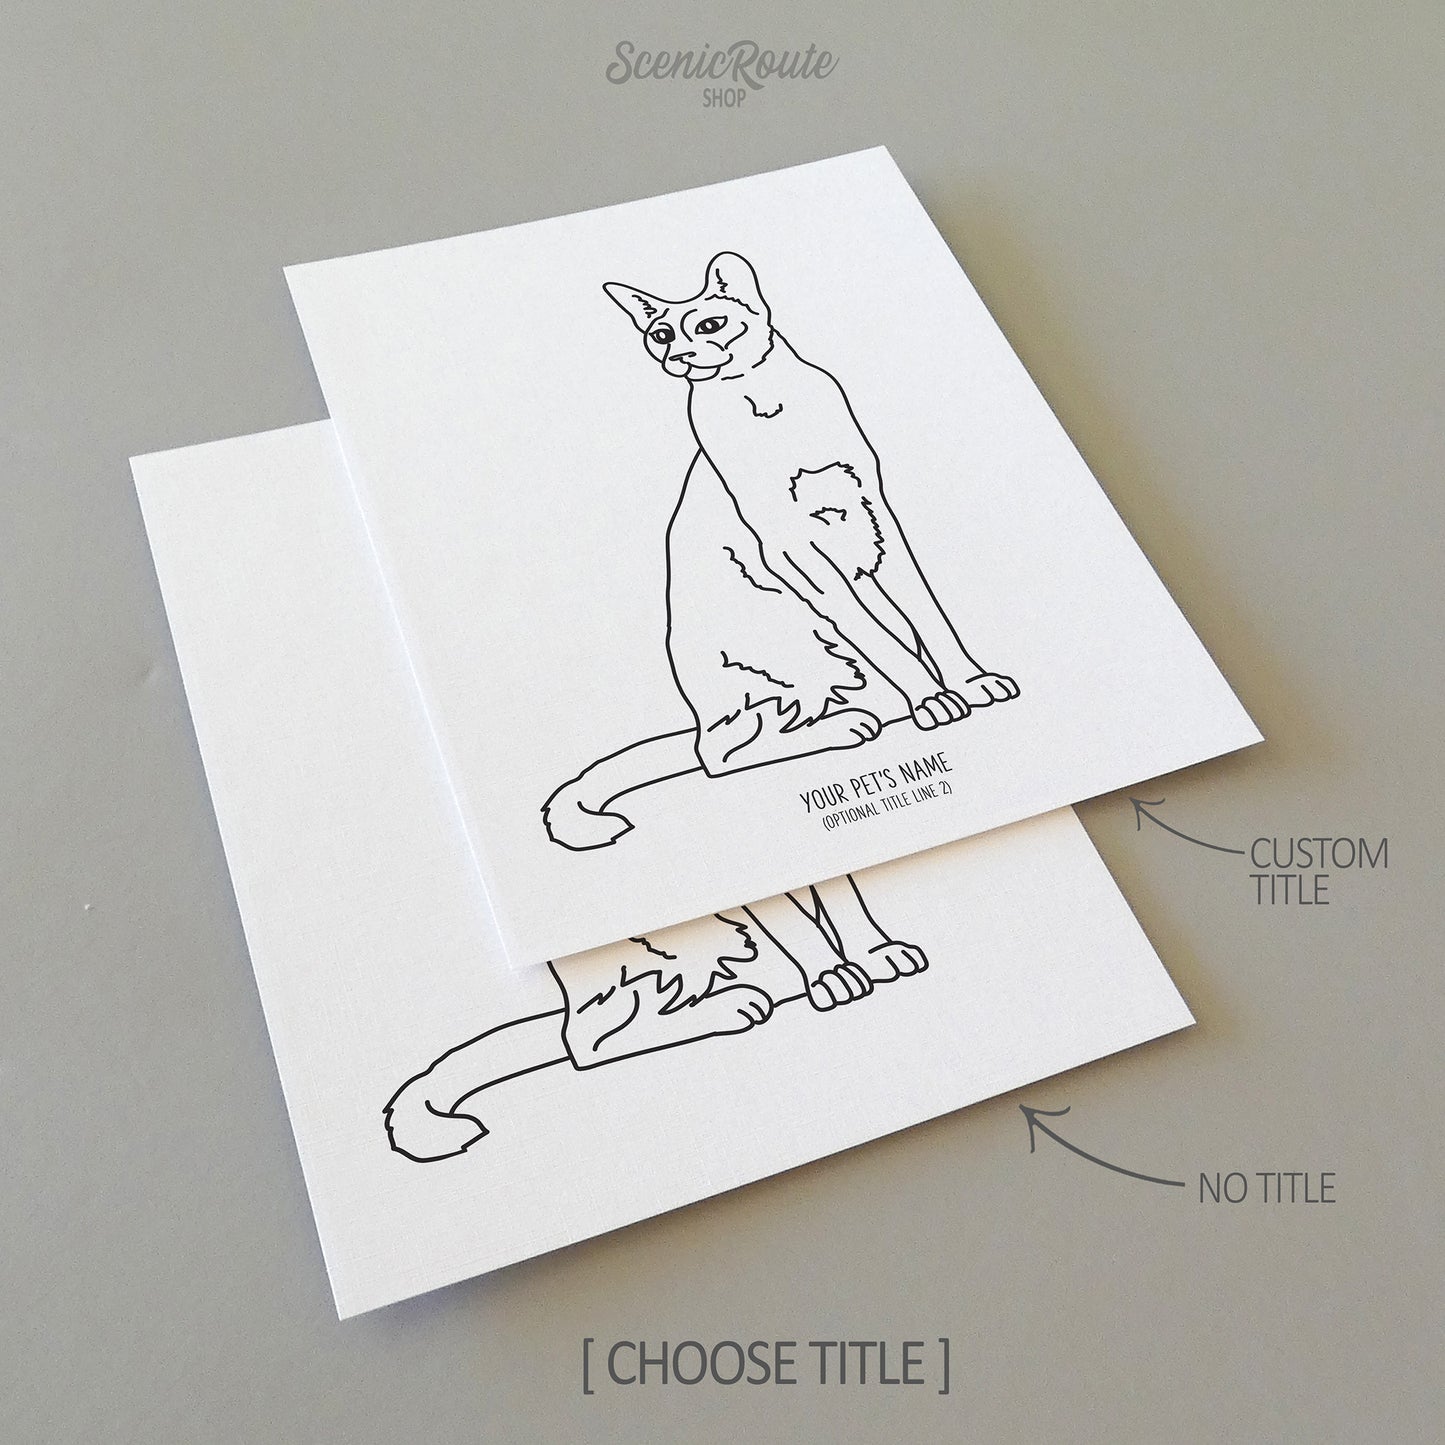 Two line art drawings of a Siamese Cat on white linen paper with a gray background.  The pieces are shown with “No Title” and “Custom Title” options for the available art print options.